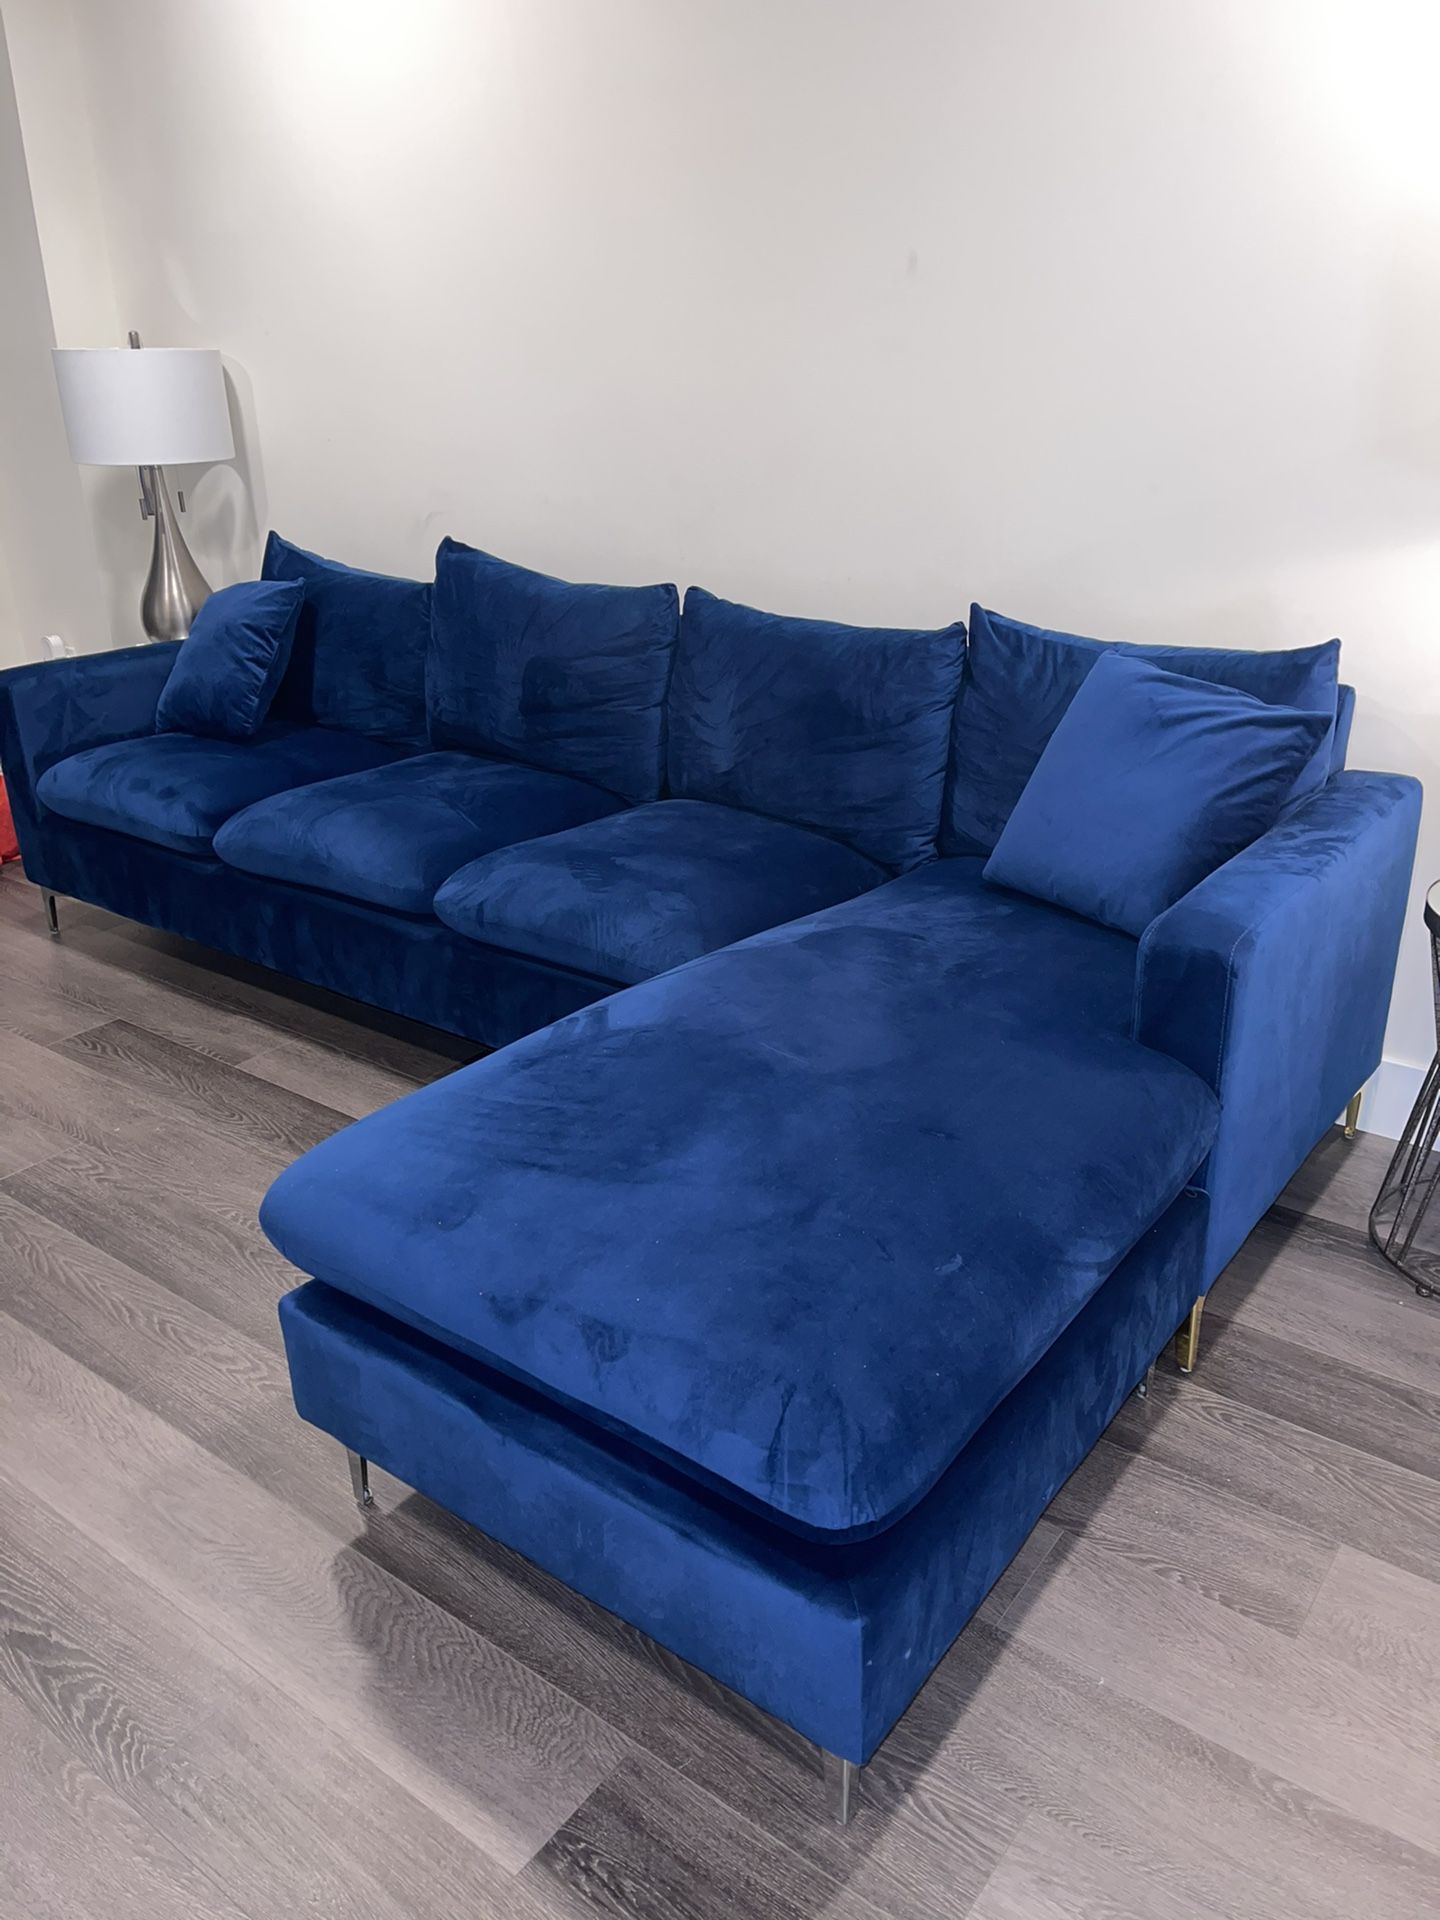 Navy Blue Sectional For Sale